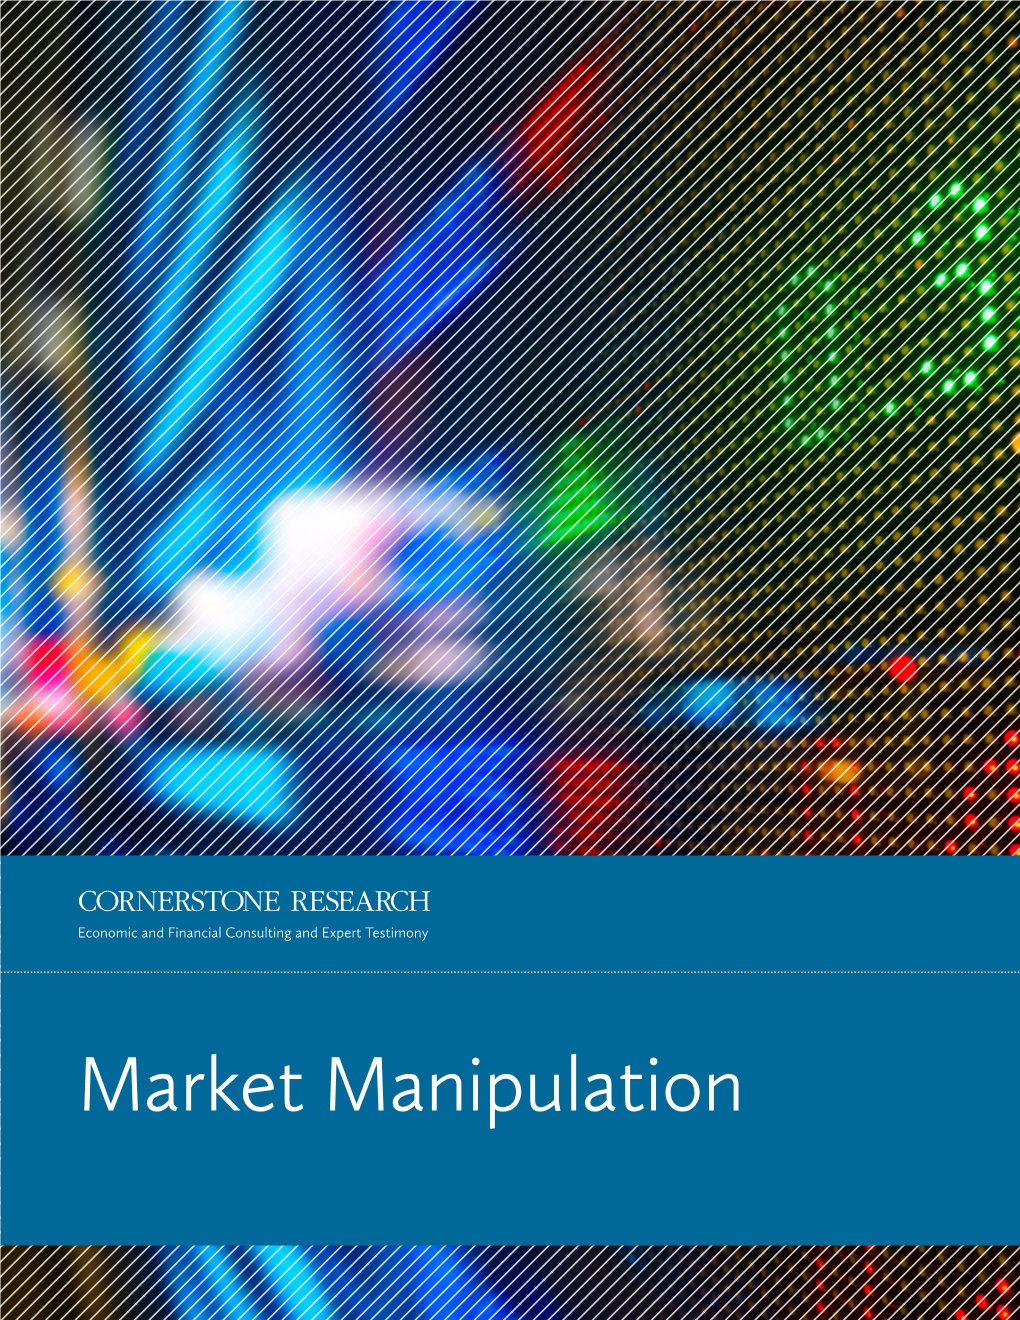 Market Manipulation Cornerstone Research Works with Clients on High-Profile Market Manipulation Litigation and Regulatory Matters